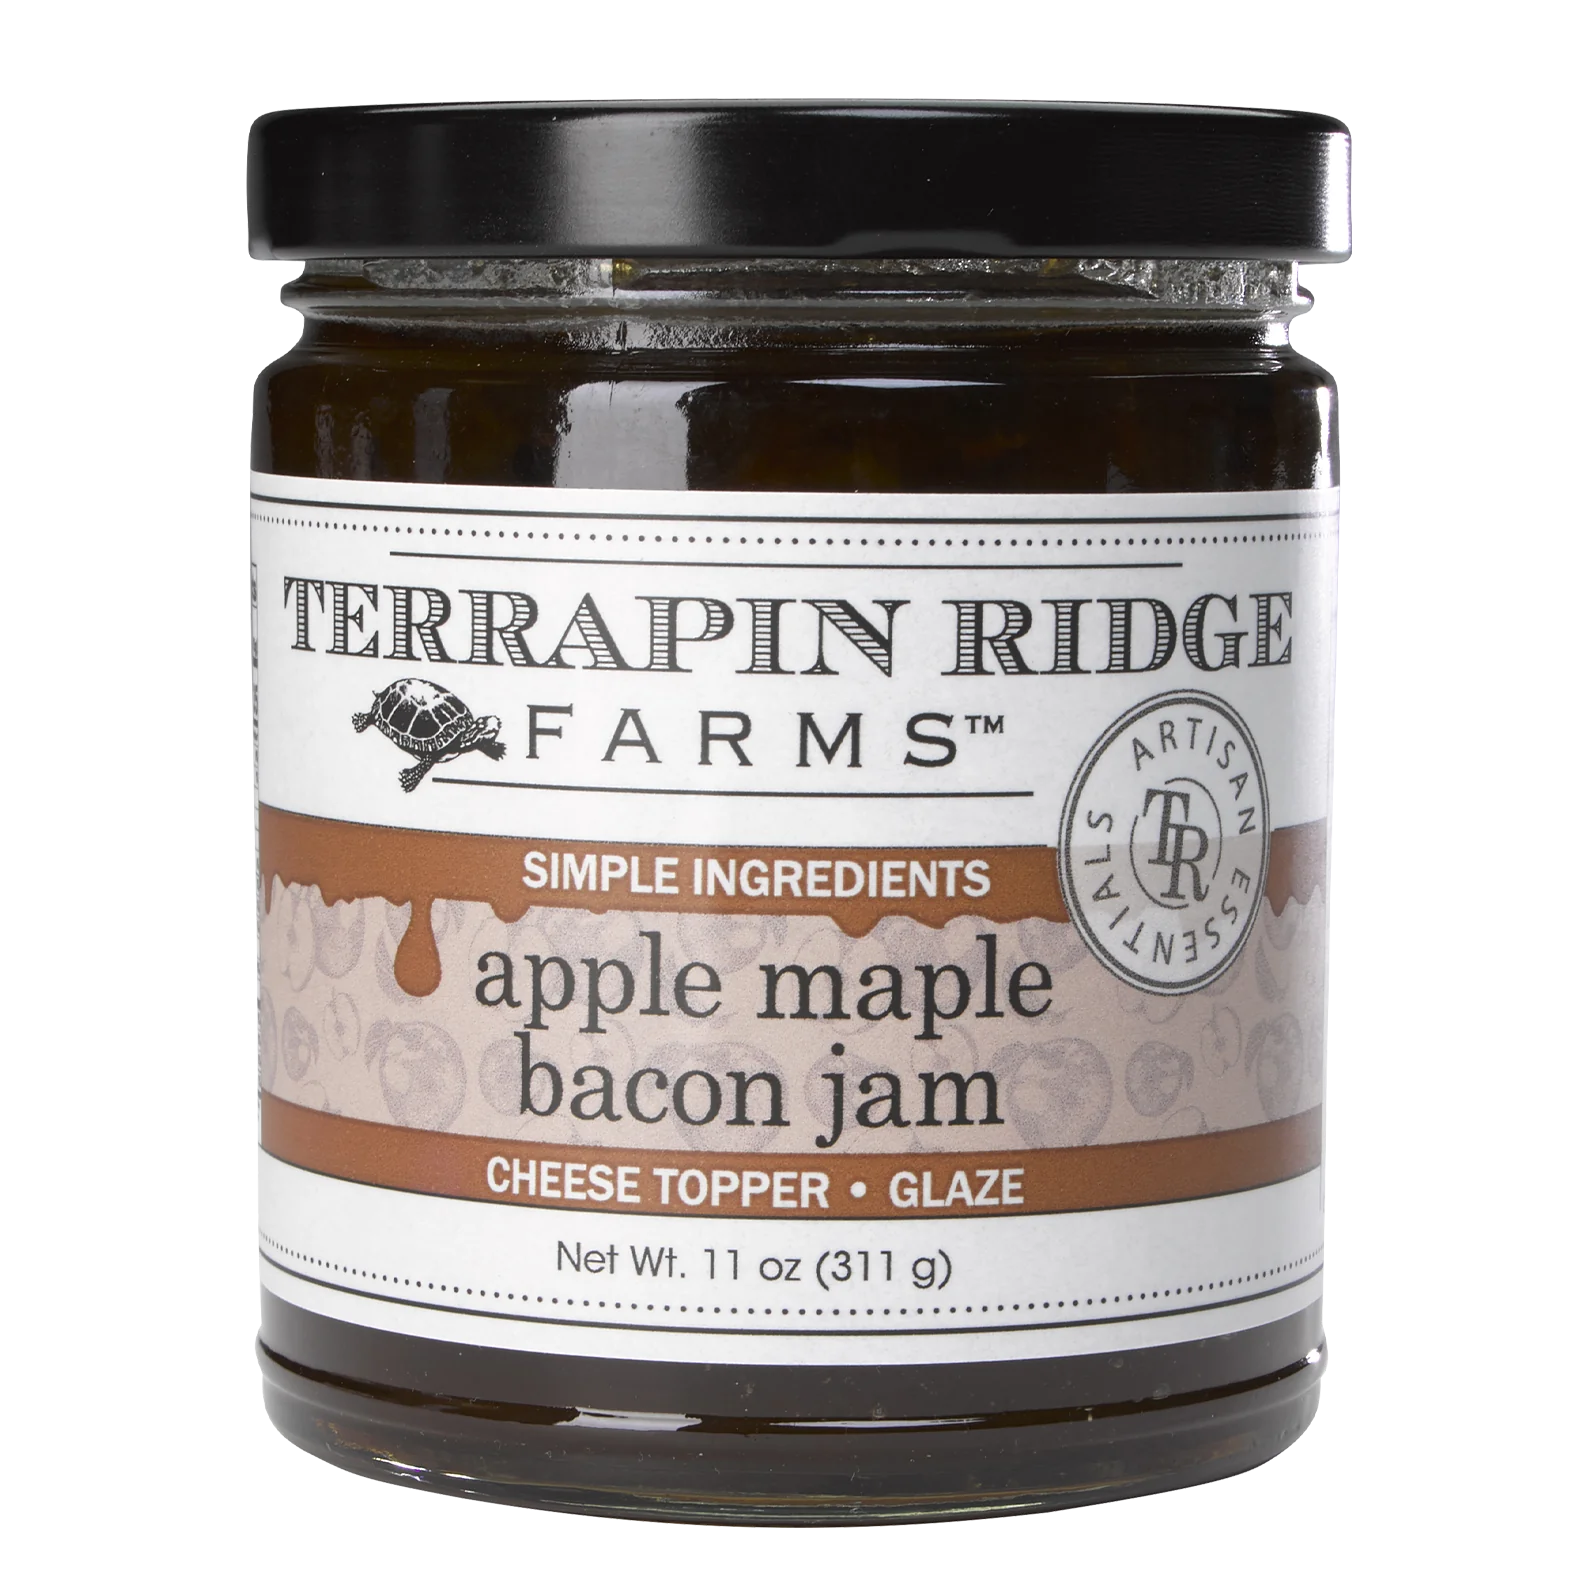 Terrapin Ridge Farms creates a delicious Terrapin Ridge Apple Maple Bacon Jam that combines sweet and savory flavors. The jam is made with fresh apples, rich maple syrup, and smoky bacon, resulting in a mouth